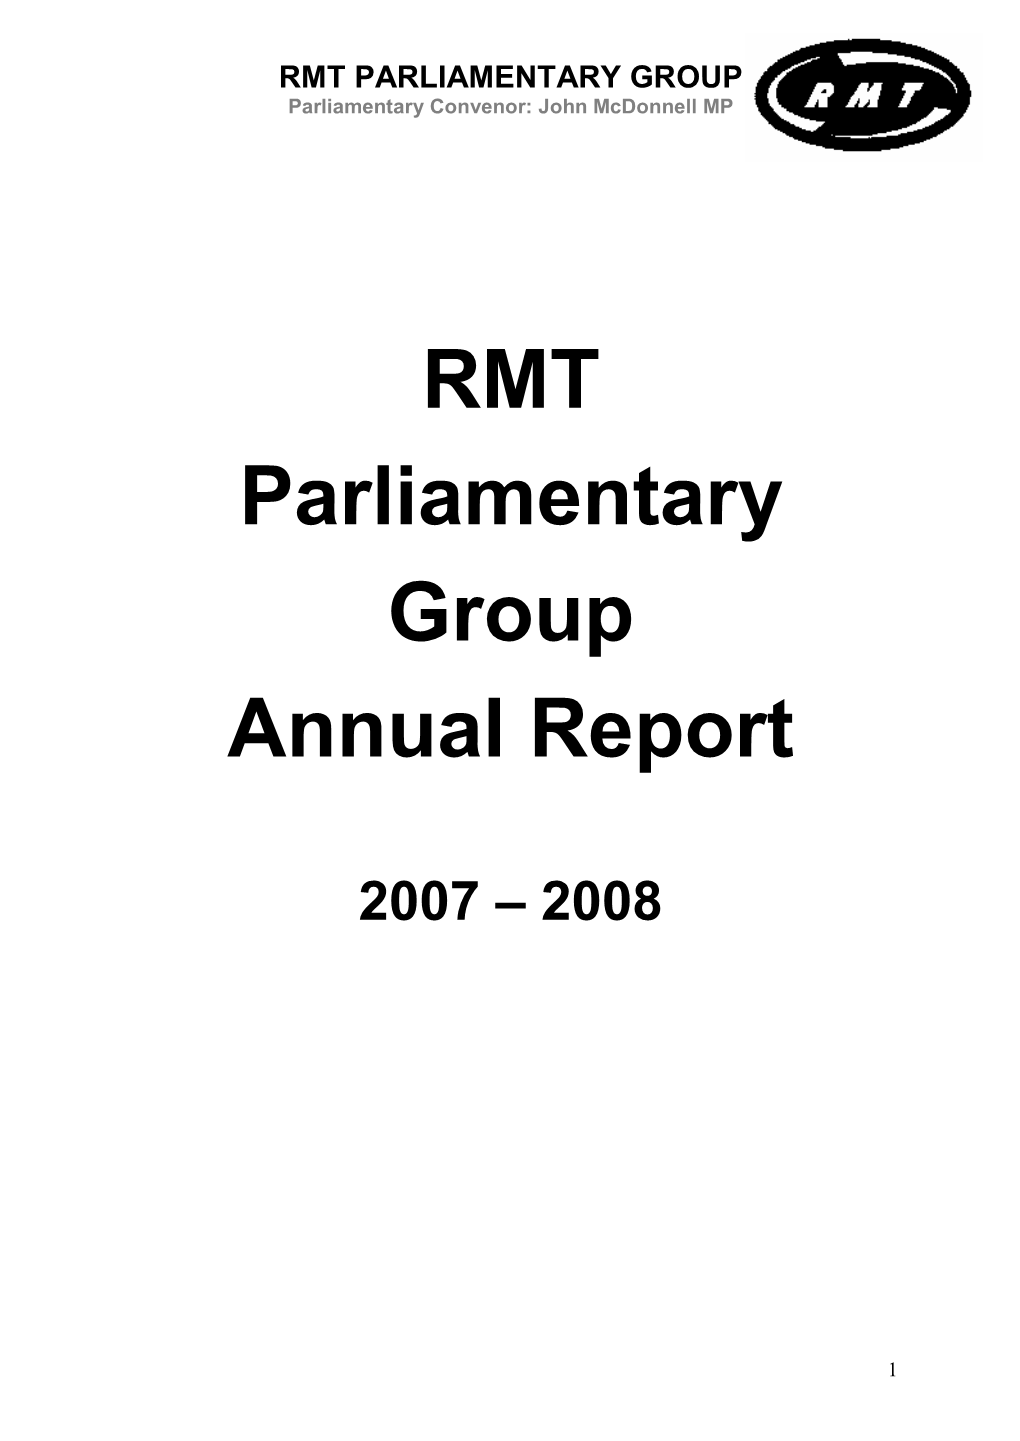 RMT PG Annual Report 07-08